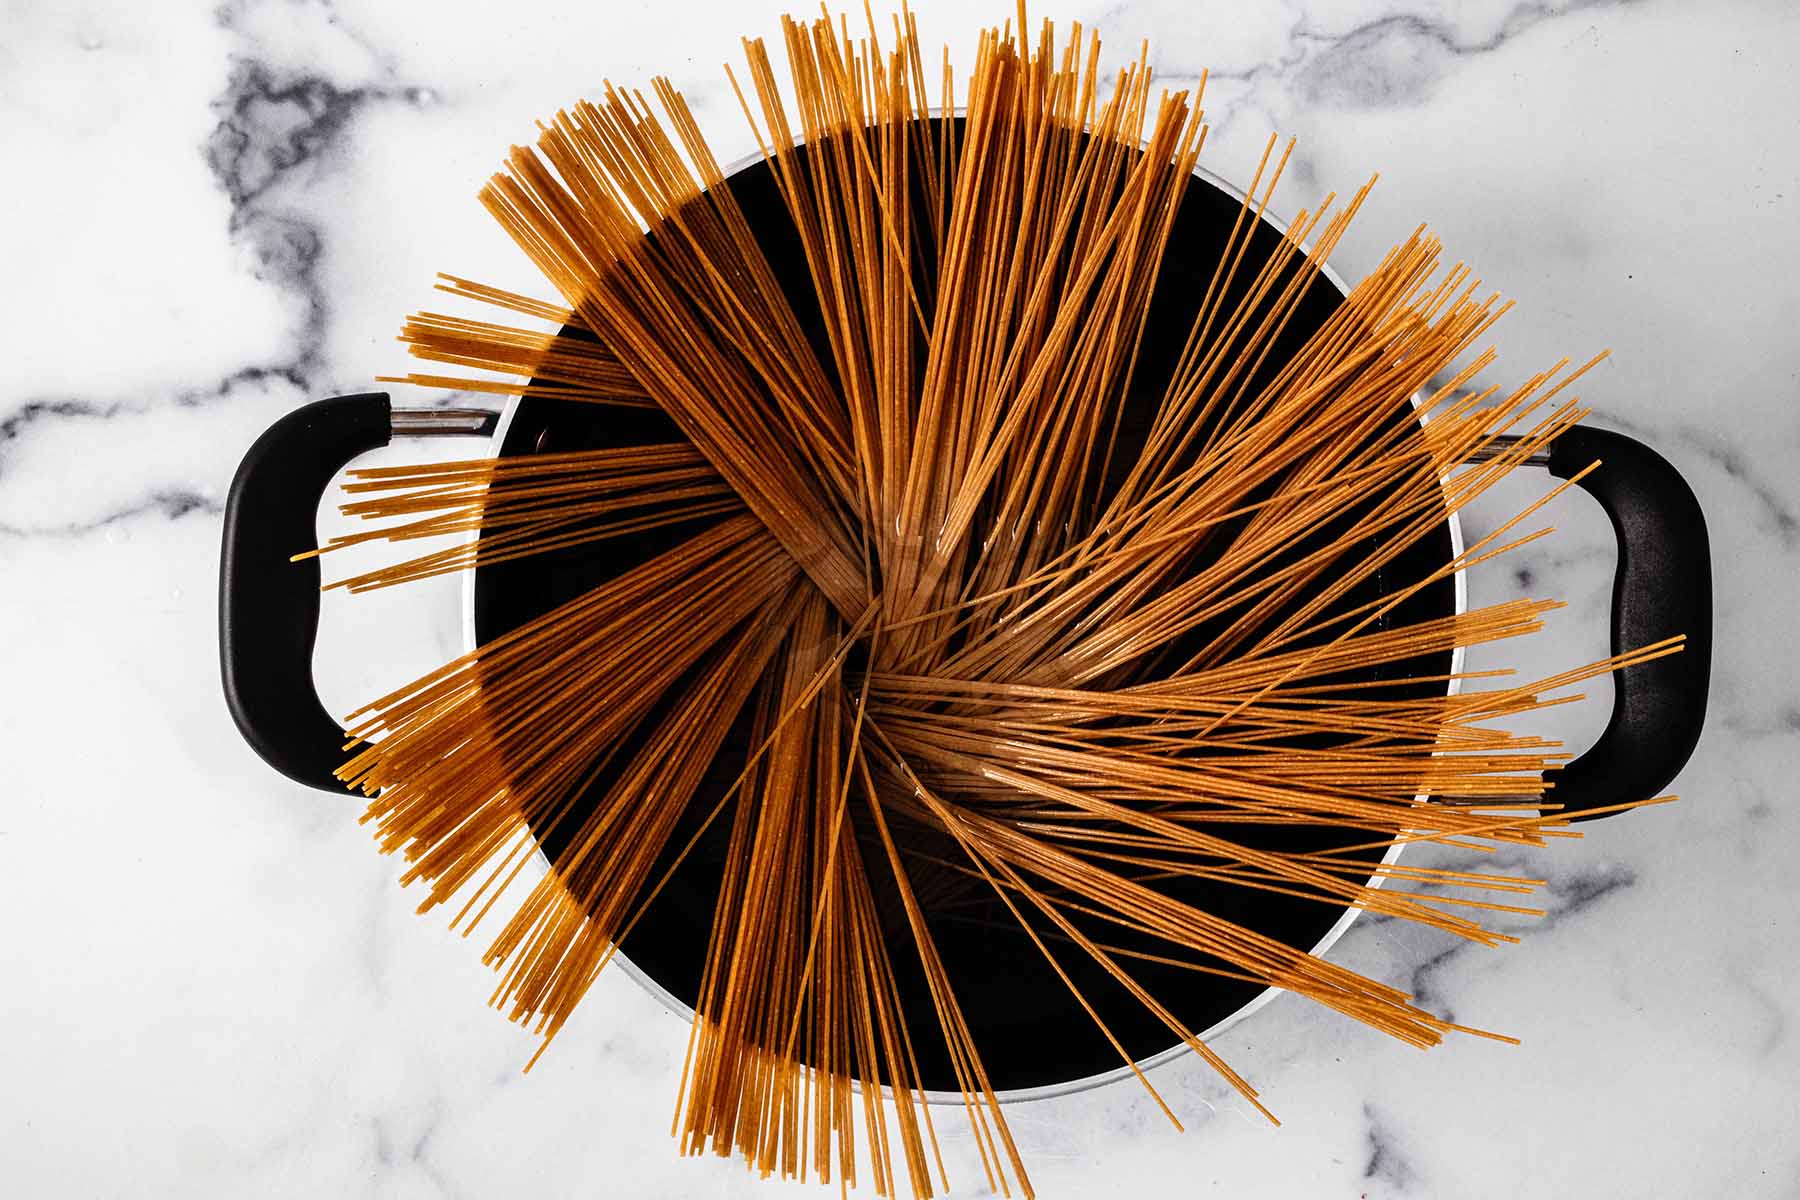 Thin spaghetti sticking out of a large pot of water.